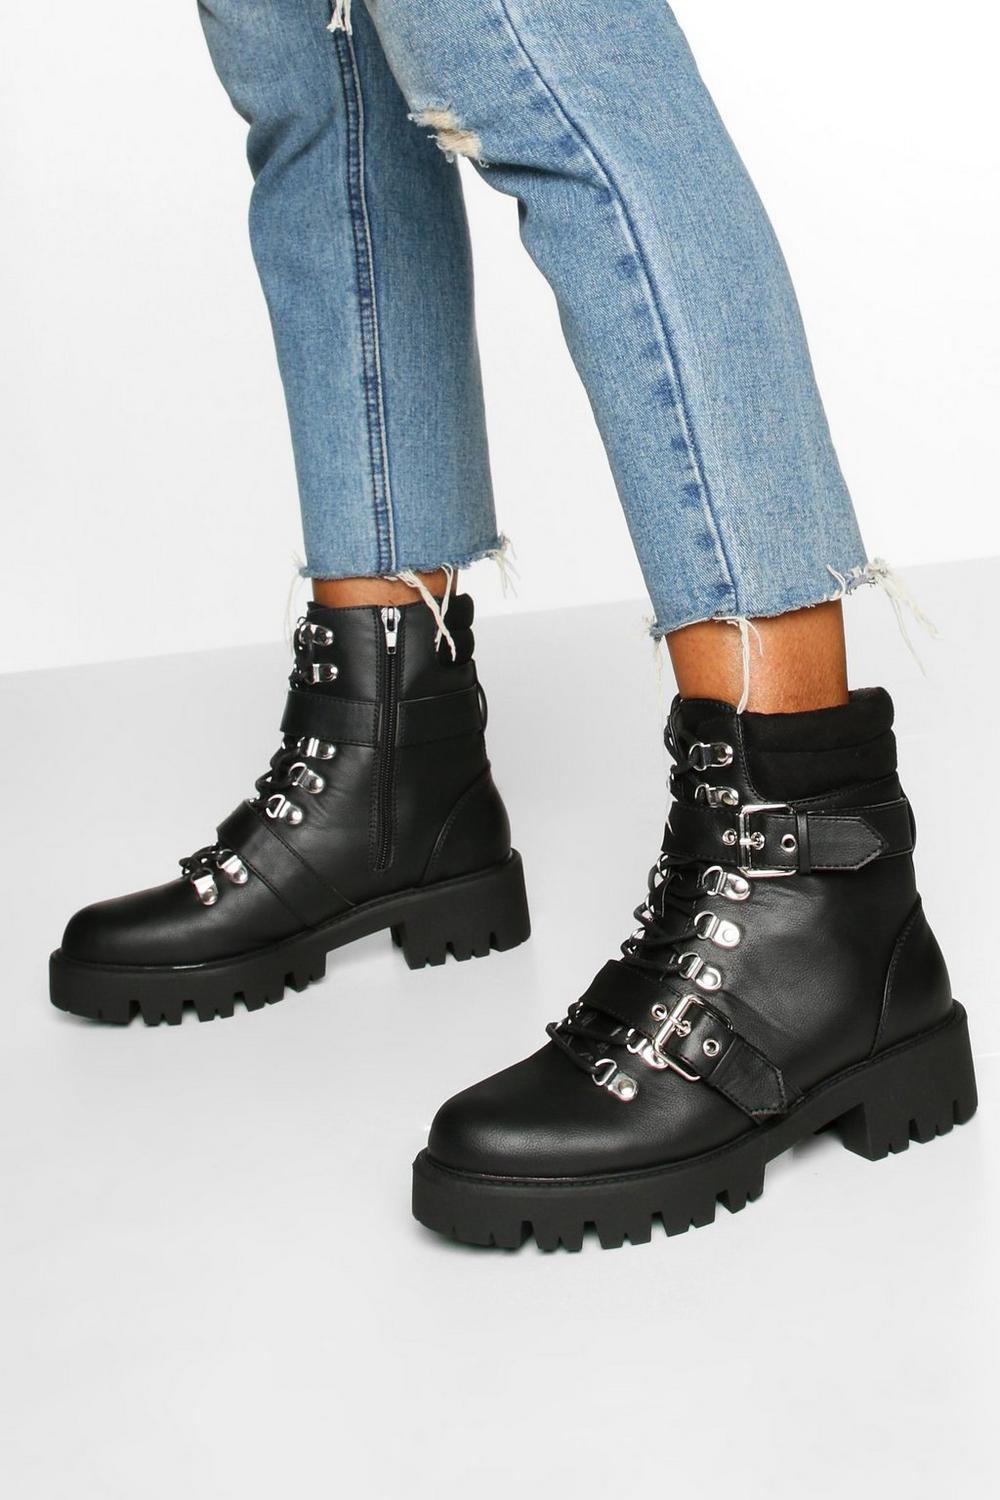 Boohoo + Buckle Detail Padded Cuff Hiker Boots